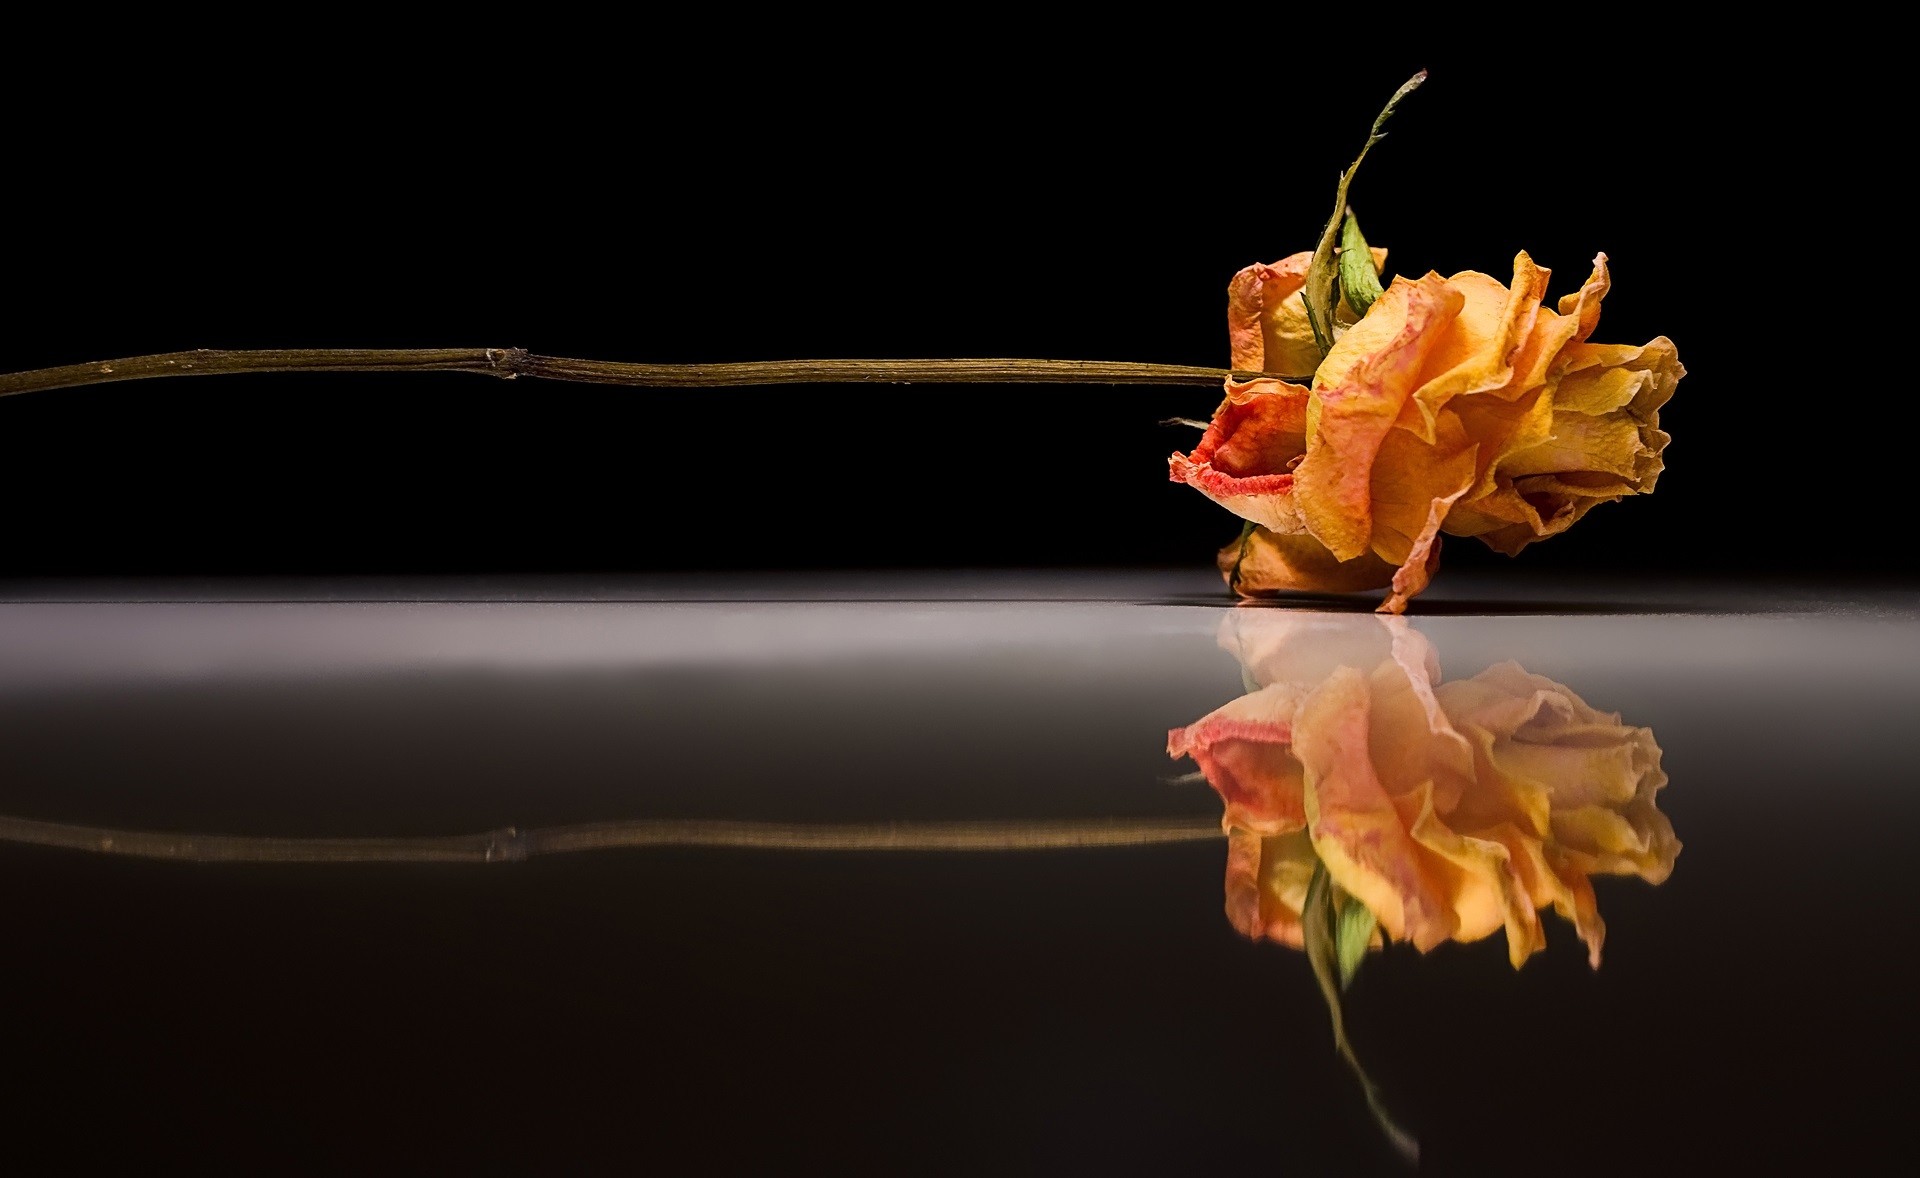 rose, Photography, Flowers, Reflection Wallpaper